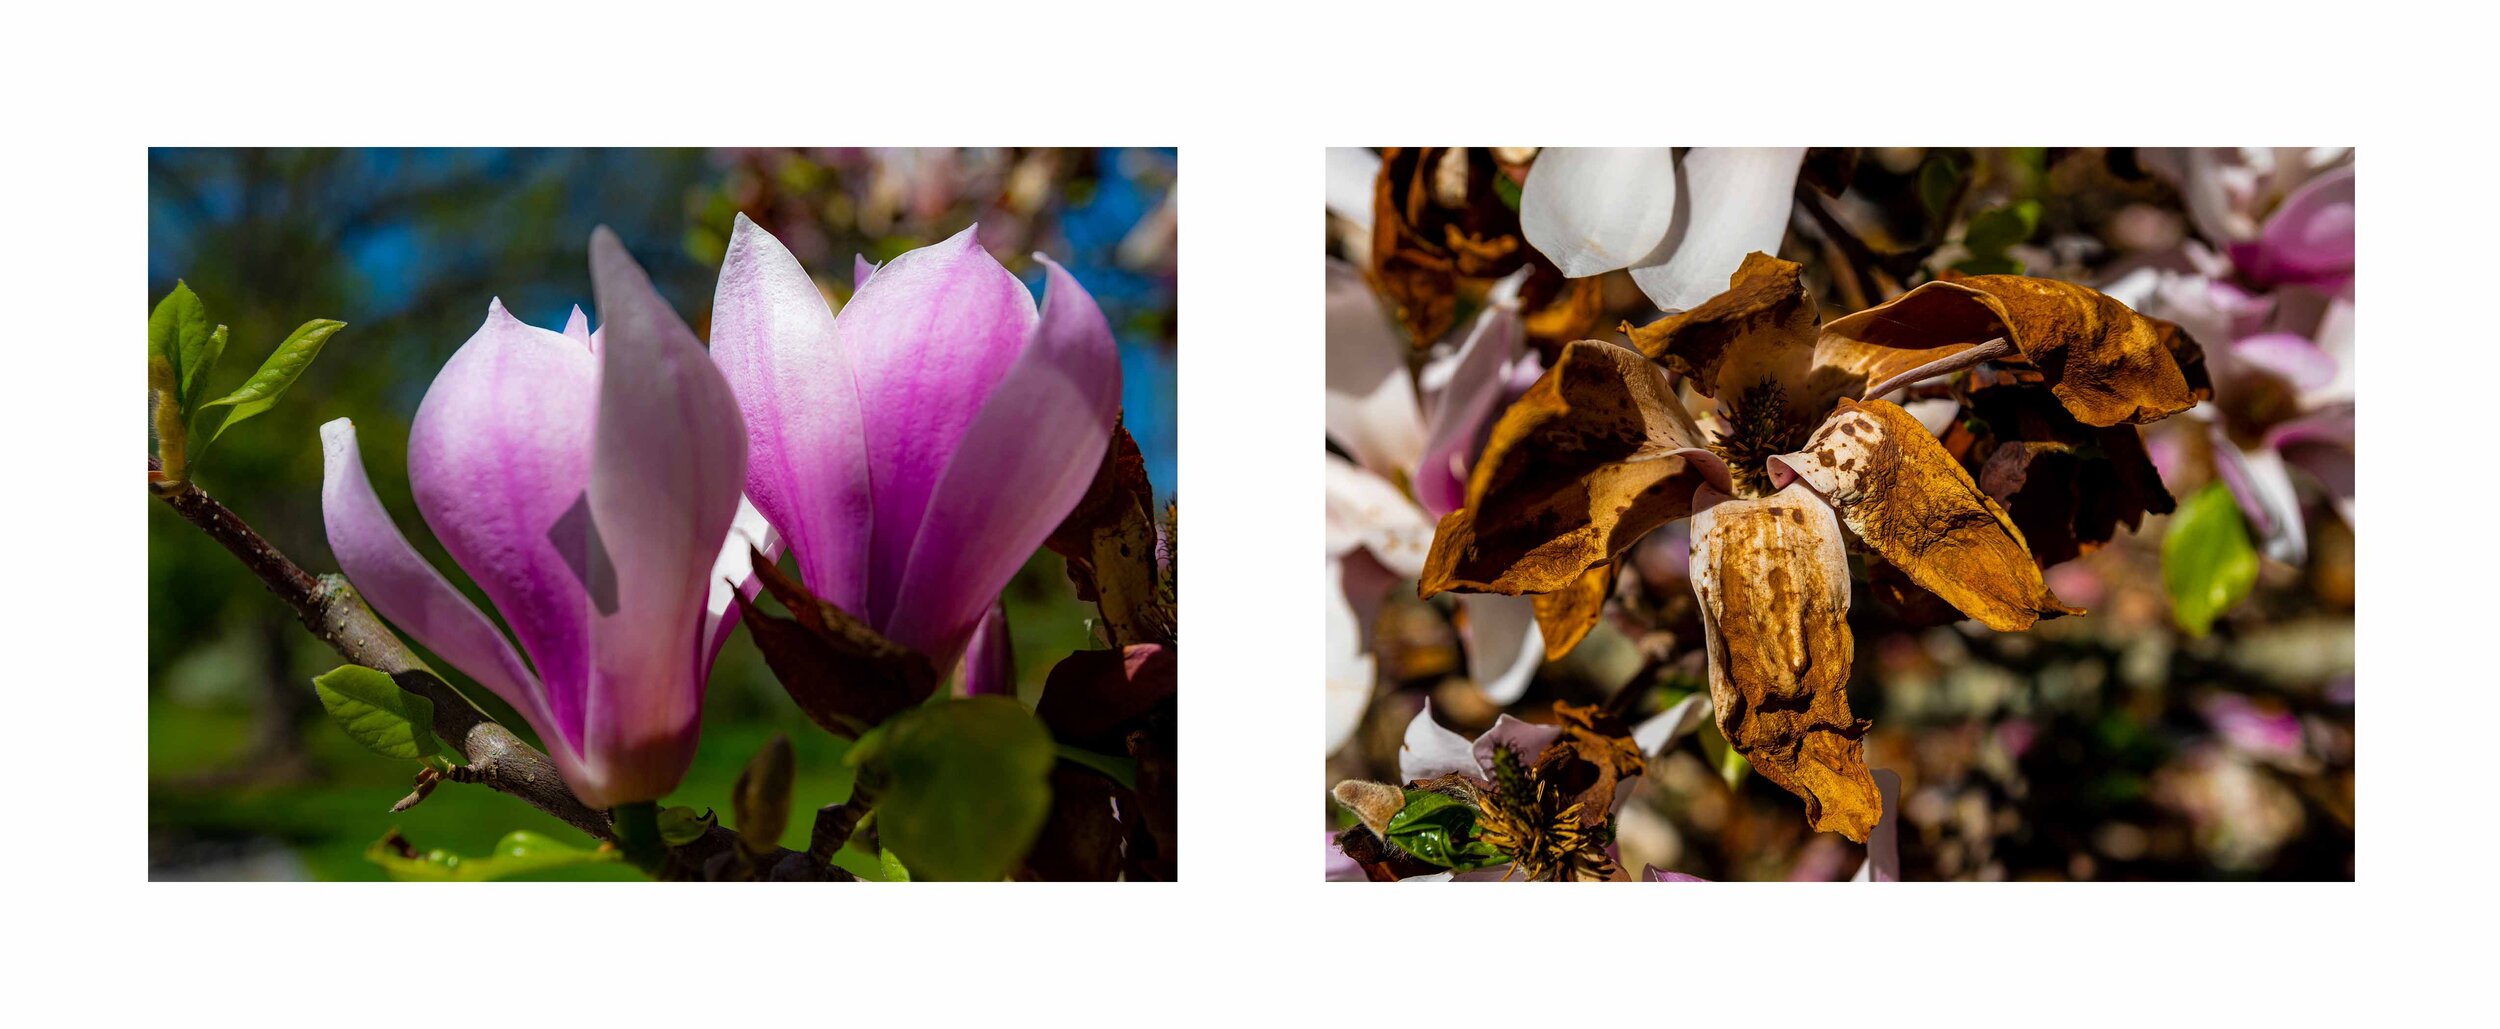 Life Cycle - Magnolia Dyptic.jpg